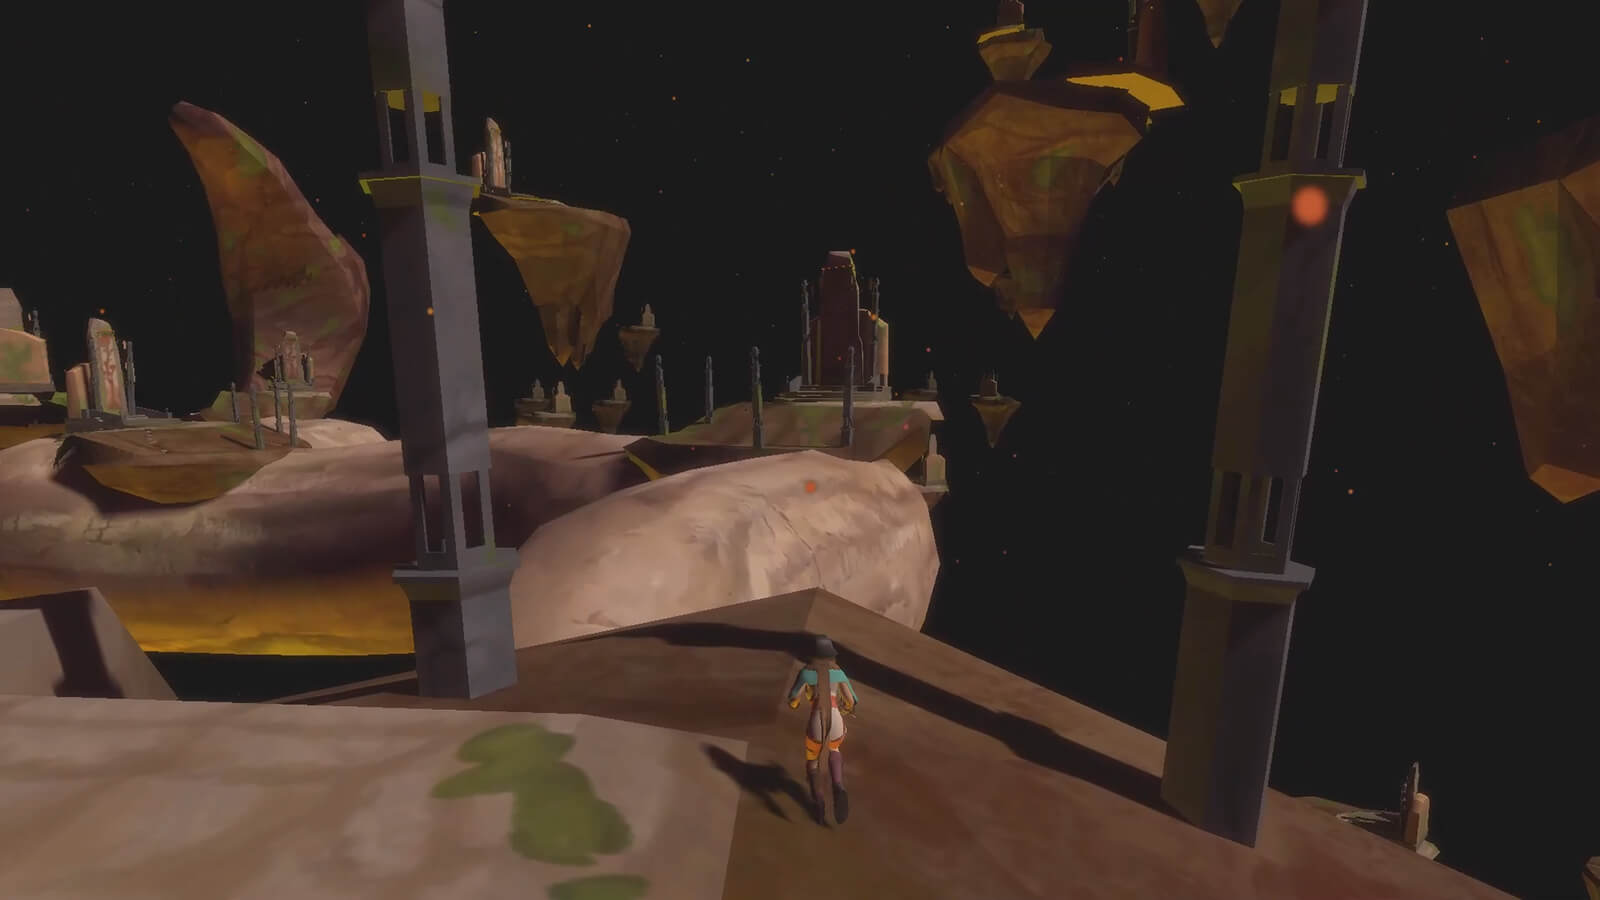 A character stands between two pillars on barren boulder floating in space, looking at similar boulders in the distance.